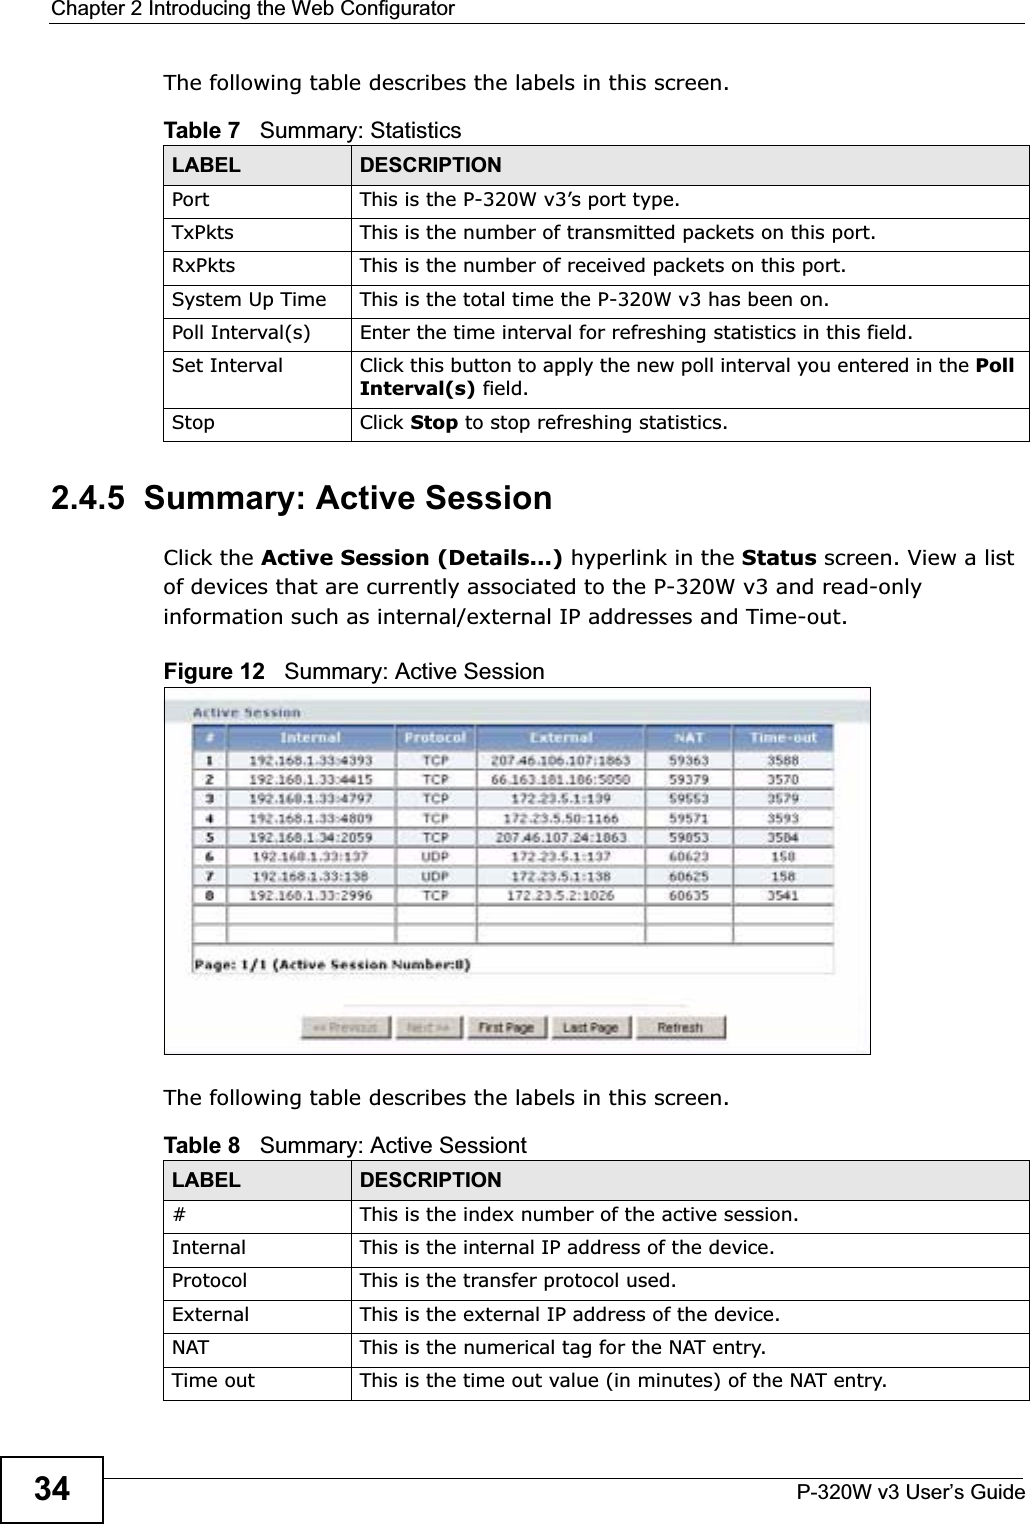 Chapter 2 Introducing the Web ConfiguratorP-320W v3 User’s Guide34The following table describes the labels in this screen. 2.4.5  Summary: Active SessionClick the Active Session (Details...) hyperlink in the Status screen. View a list of devices that are currently associated to the P-320W v3 and read-only information such as internal/external IP addresses and Time-out.Figure 12   Summary: Active SessionThe following table describes the labels in this screen.Table 7   Summary: StatisticsLABEL DESCRIPTIONPort This is the P-320W v3’s port type.TxPkts  This is the number of transmitted packets on this port.RxPkts  This is the number of received packets on this port.System Up Time This is the total time the P-320W v3 has been on.Poll Interval(s) Enter the time interval for refreshing statistics in this field.Set Interval Click this button to apply the new poll interval you entered in the PollInterval(s) field.Stop Click Stop to stop refreshing statistics.Table 8   Summary: Active SessiontLABEL DESCRIPTION#This is the index number of the active session. Internal  This is the internal IP address of the device.Protocol This is the transfer protocol used.External This is the external IP address of the device.NAT This is the numerical tag for the NAT entry.Time out This is the time out value (in minutes) of the NAT entry.